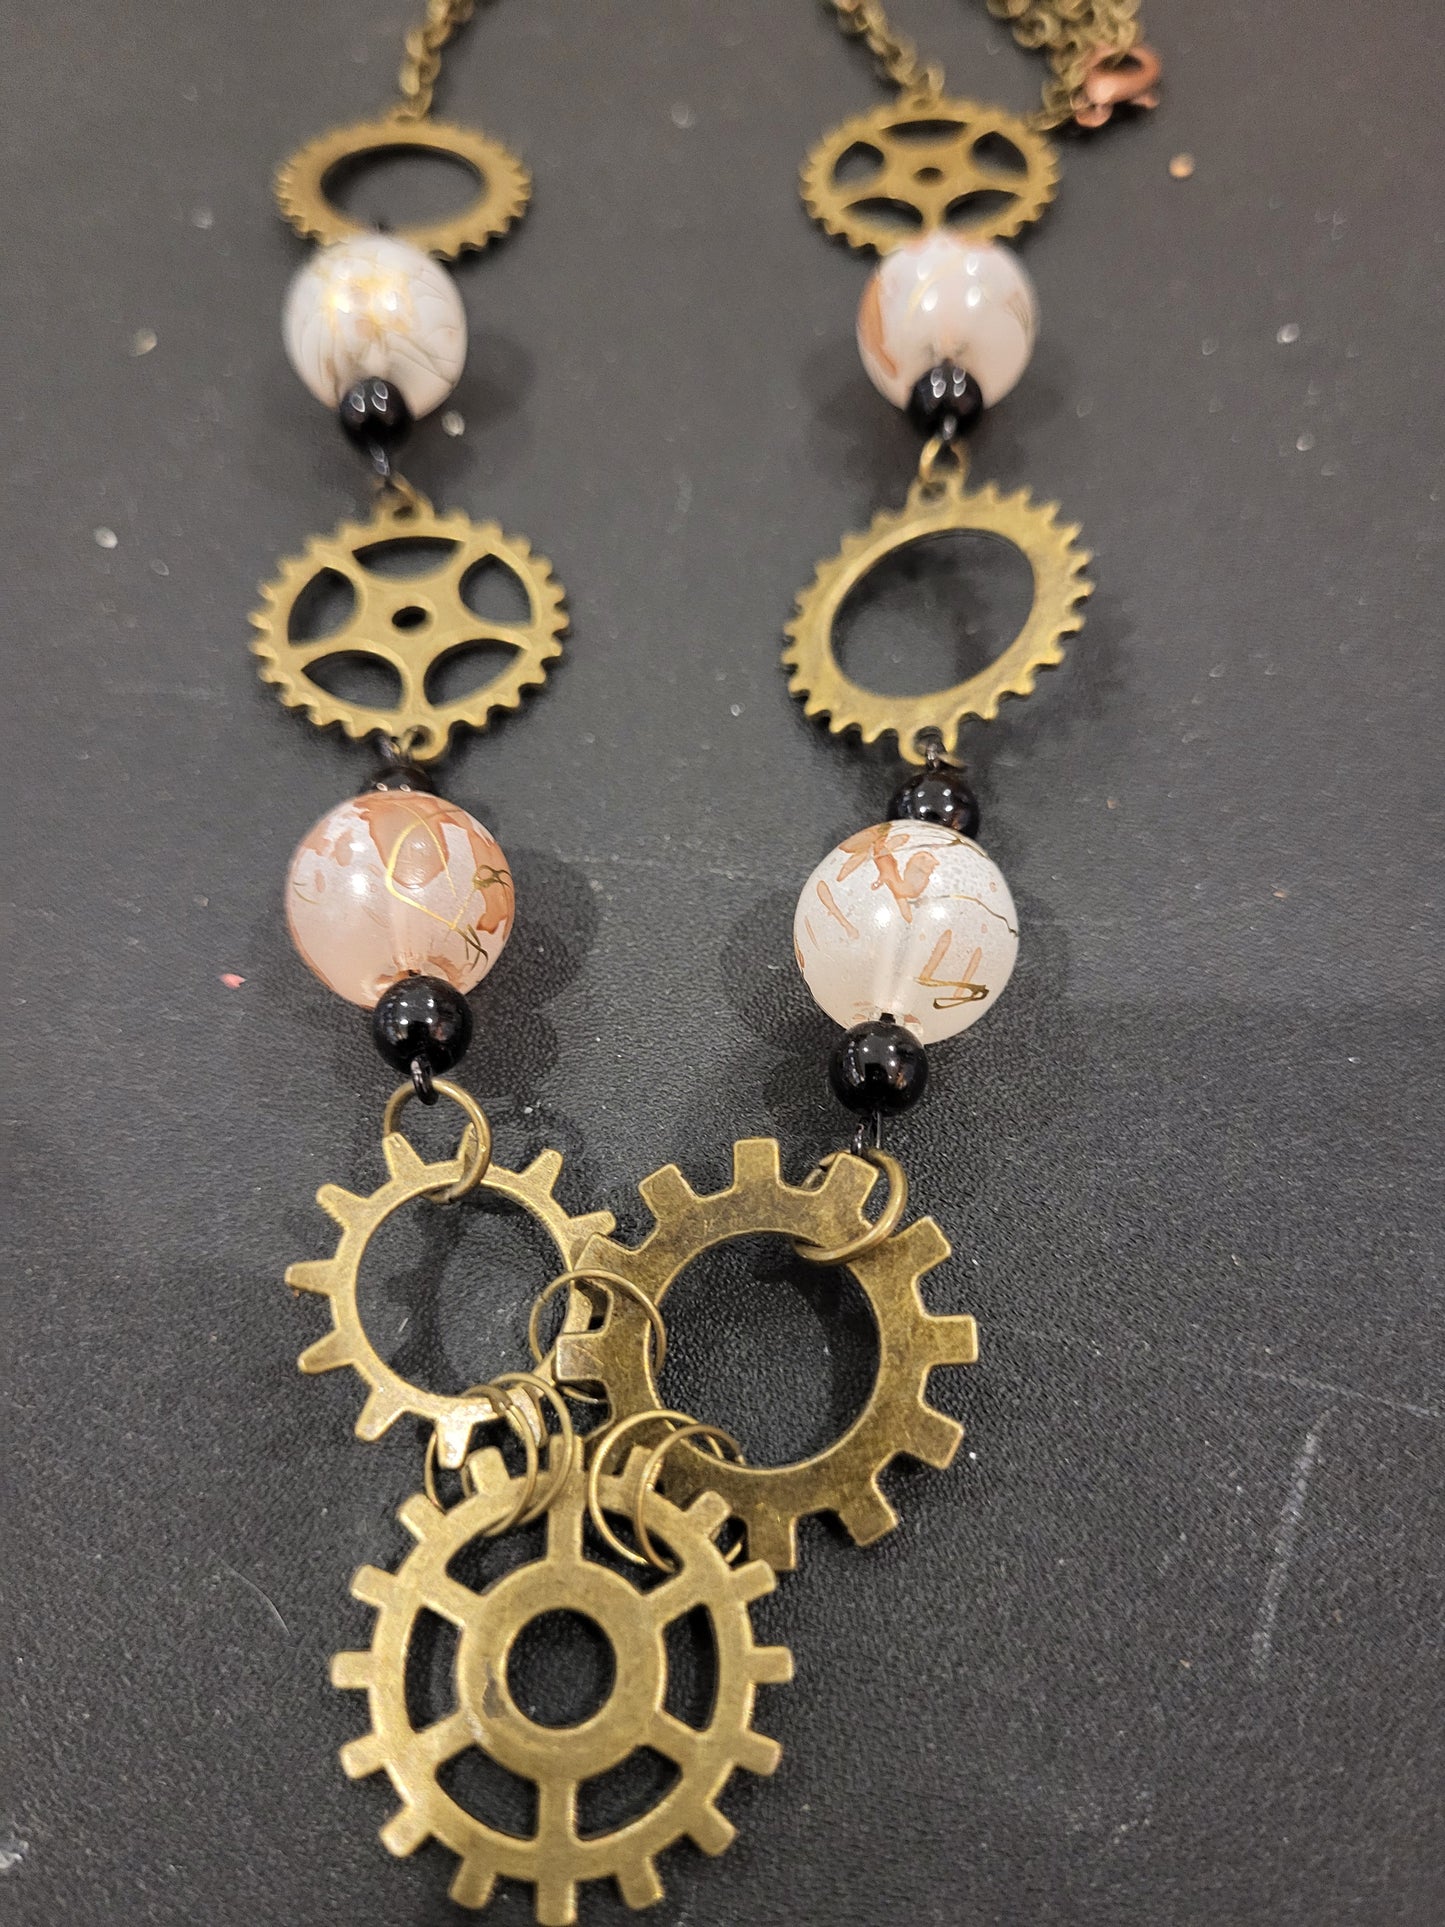 Handmade steampunk pink beads and gears necklace and earring set